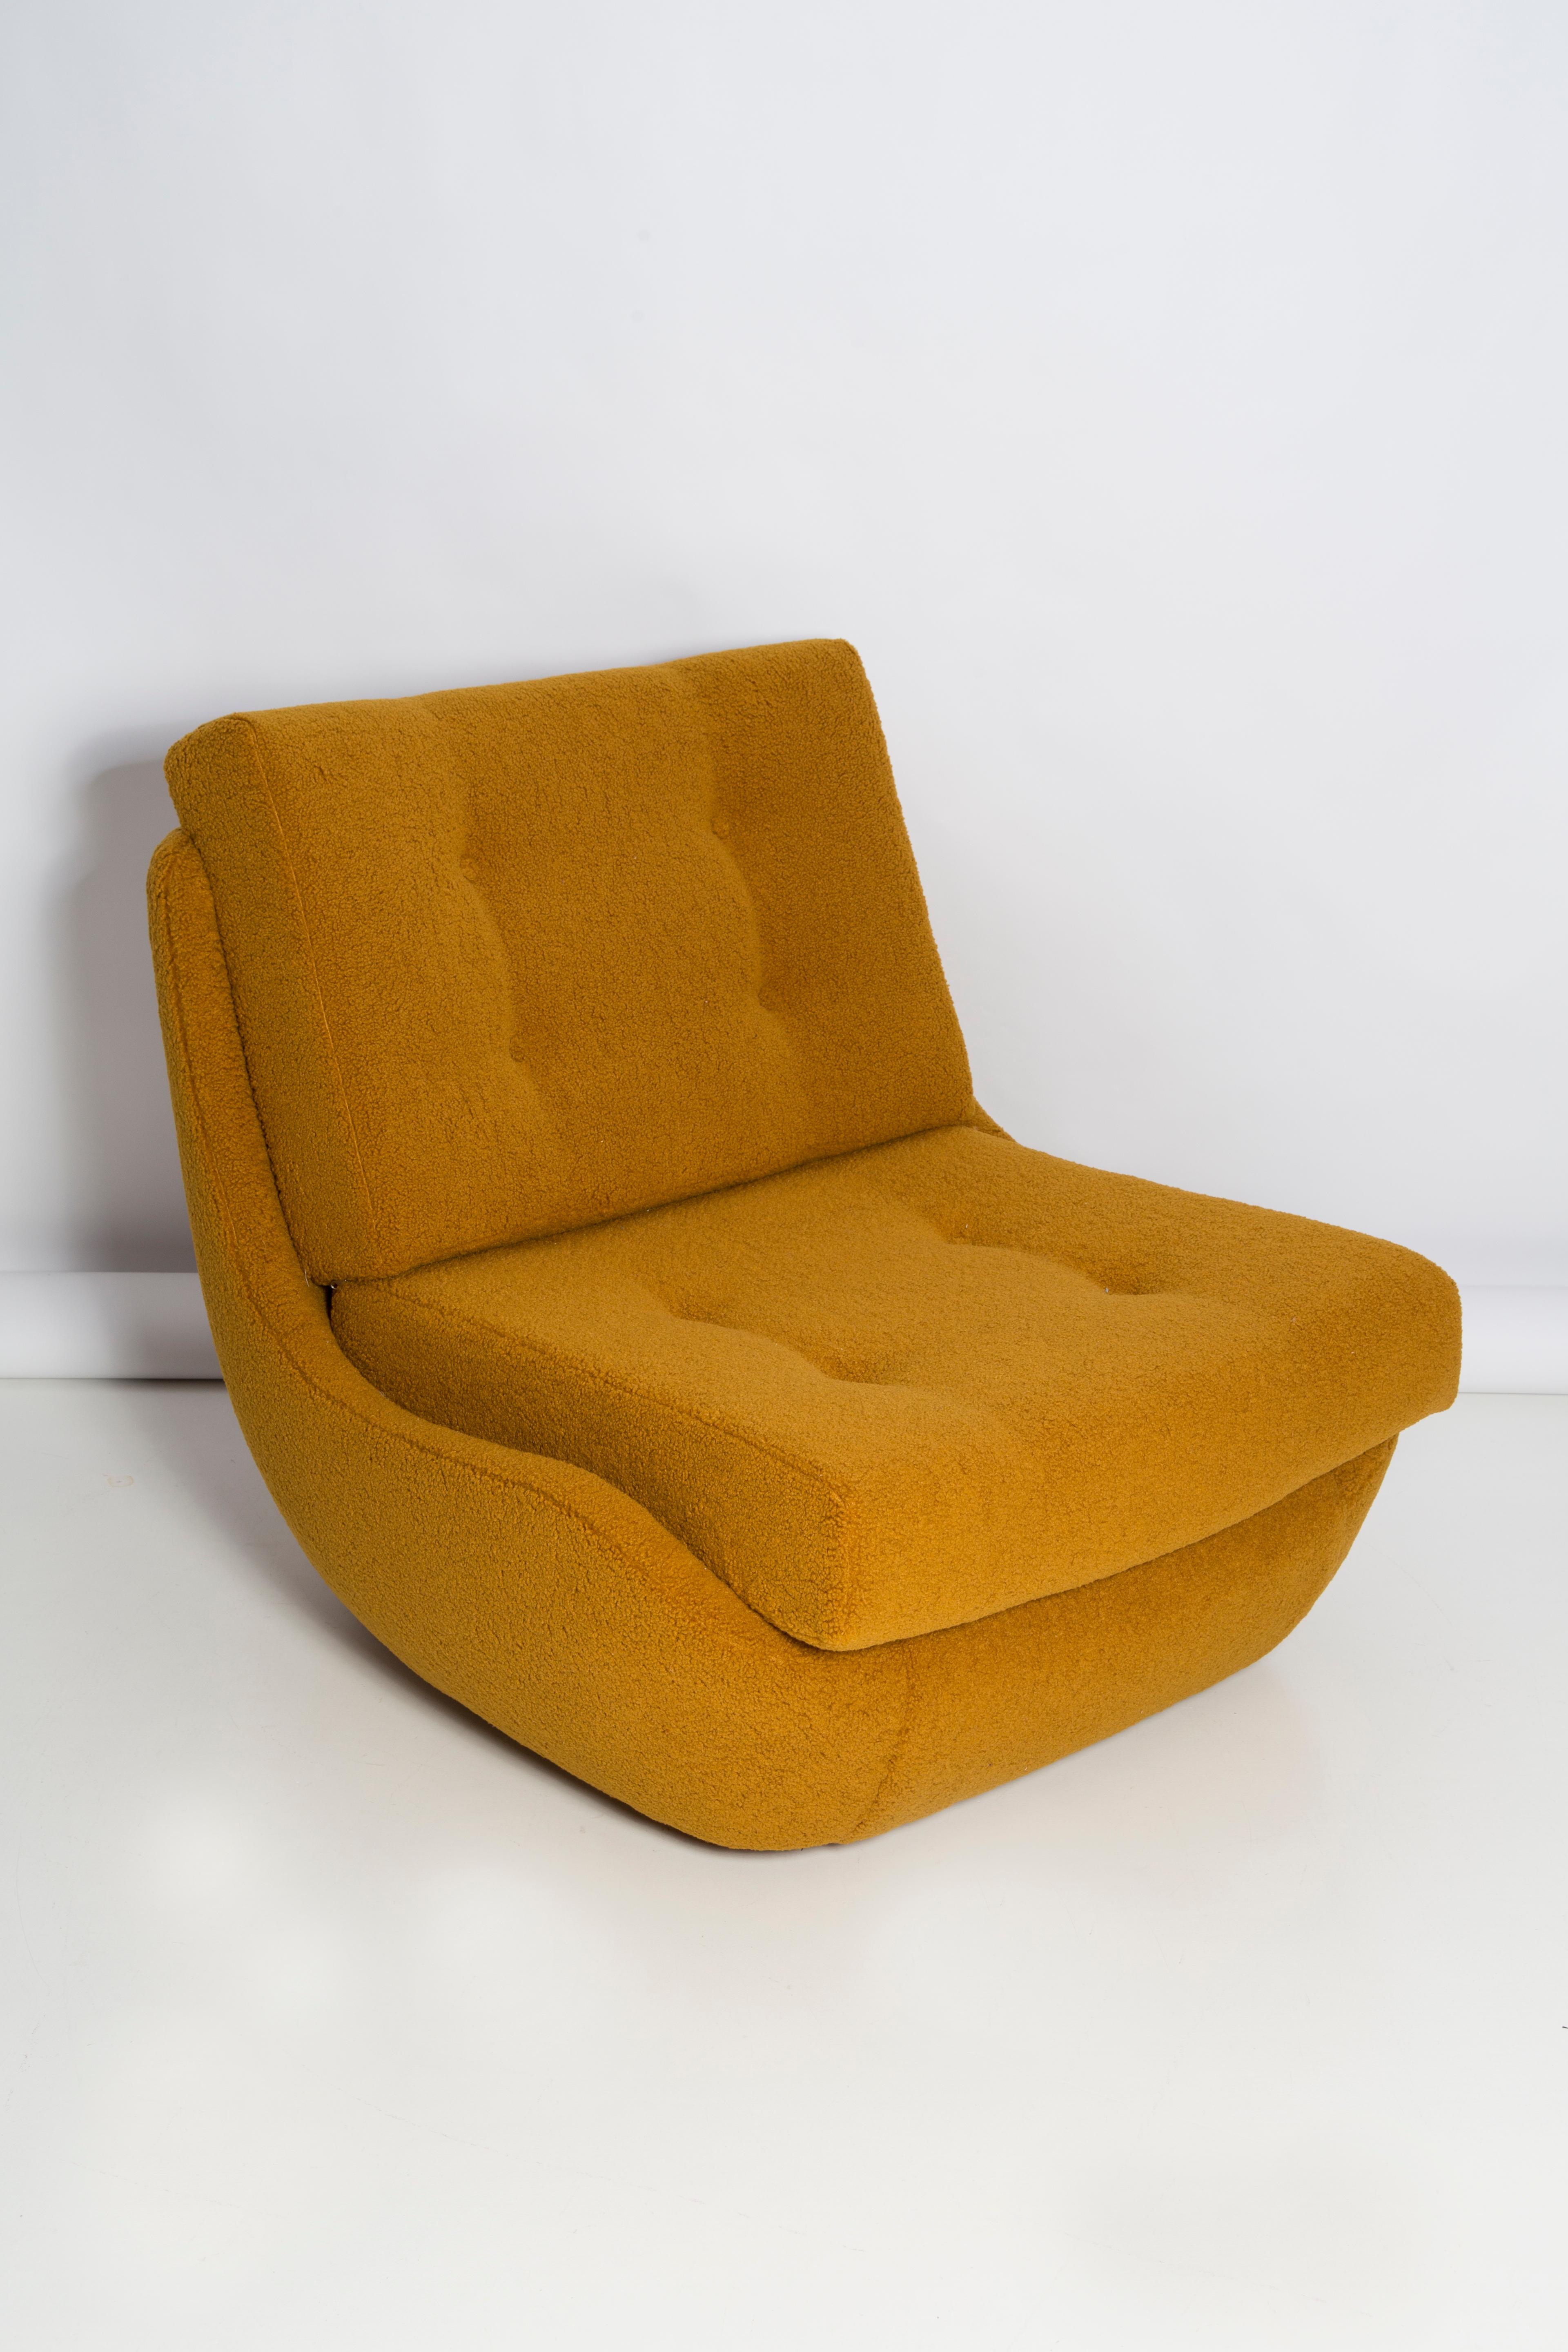 Atlantis armchair from the 1960s, produced in the Silesian furniture factory in Swiebodzin/Poland at the moment they are unique. 

Due to their dimensions, they perfectly blend in even in small apartments providing comfort and beautiful decoration.